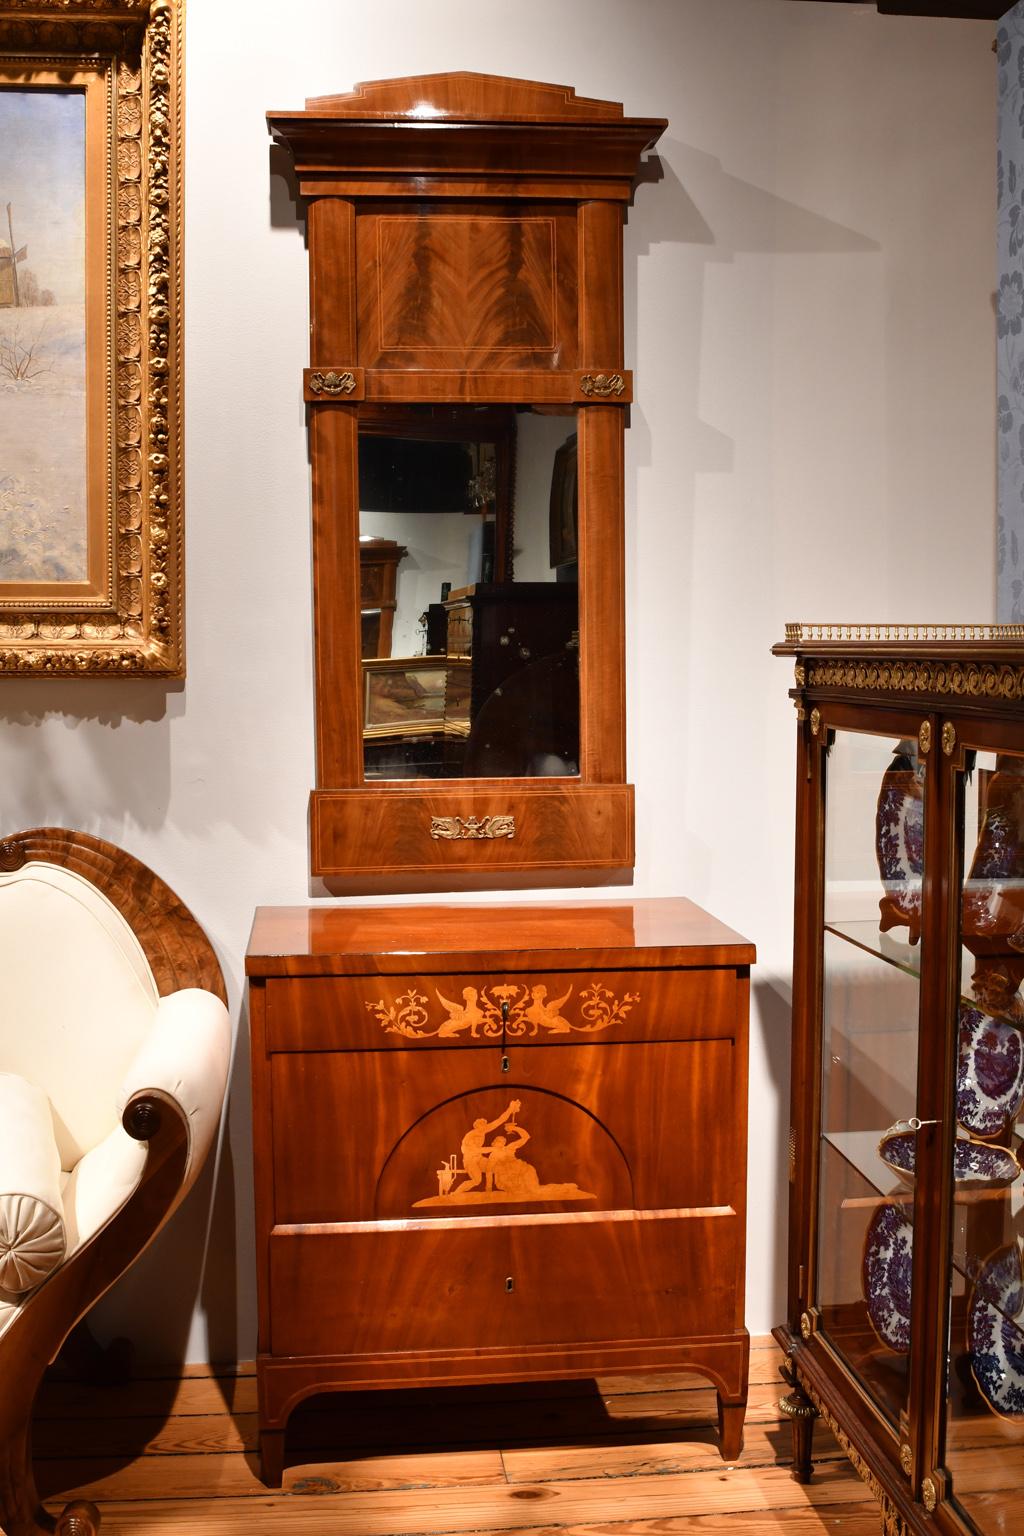 A very beautiful Empire mirror in fine West Indies/ Cuban mahogany with satinwood inlaid bandings. The book-matched figured mahogany draws the eye upward to the stepped pediment that graces the top of the mirror. Fine mounts of bronze d’ore ormolu